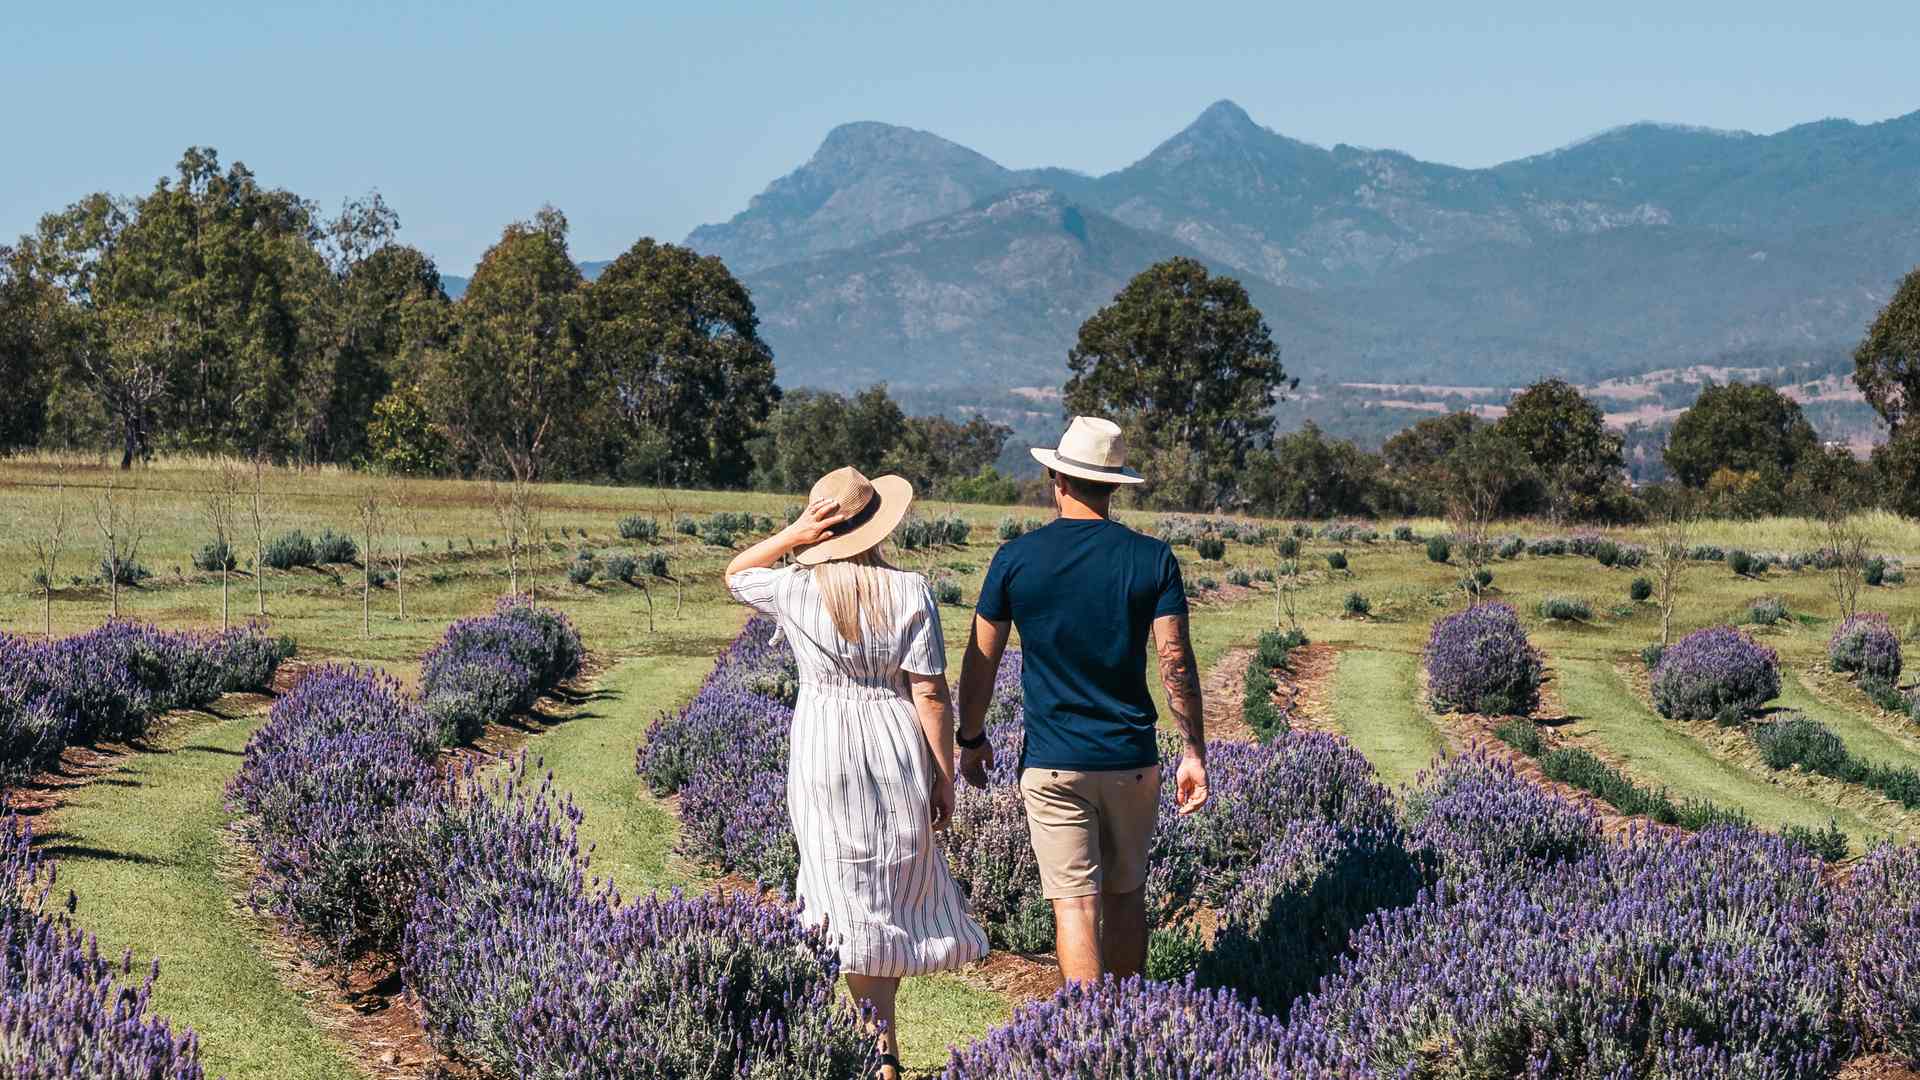 A Weekender's Guide to the Scenic Rim